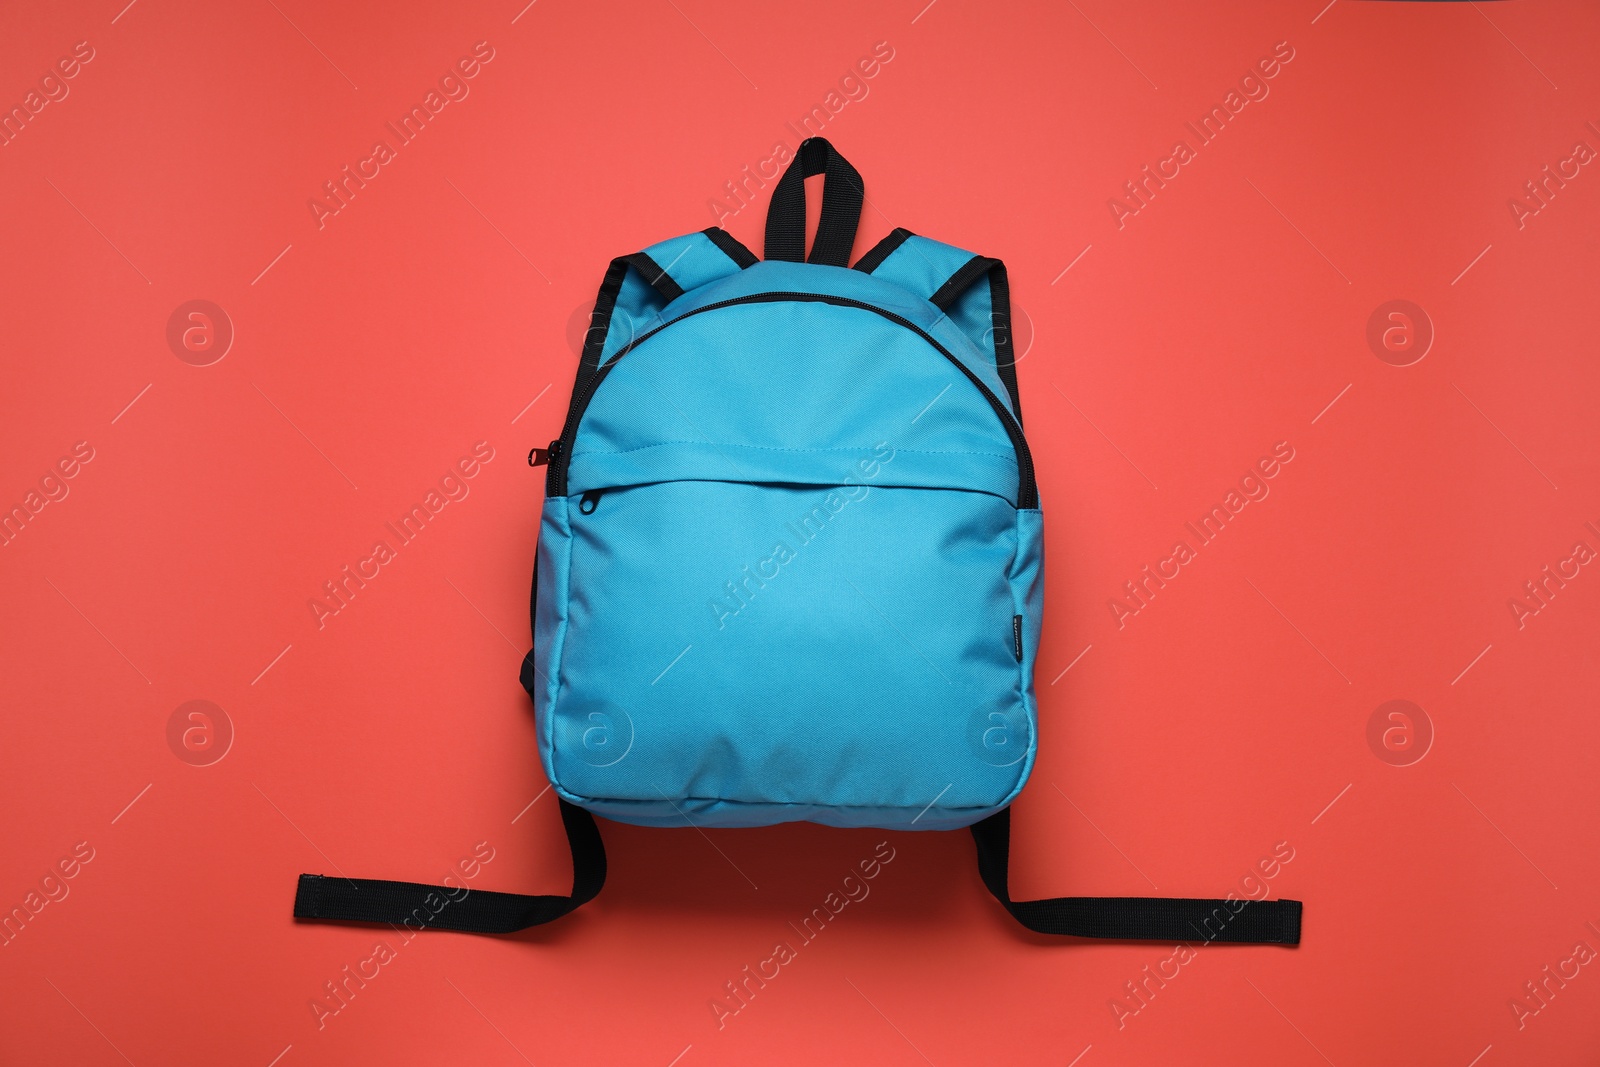 Photo of Stylish light blue backpack on red background, top view